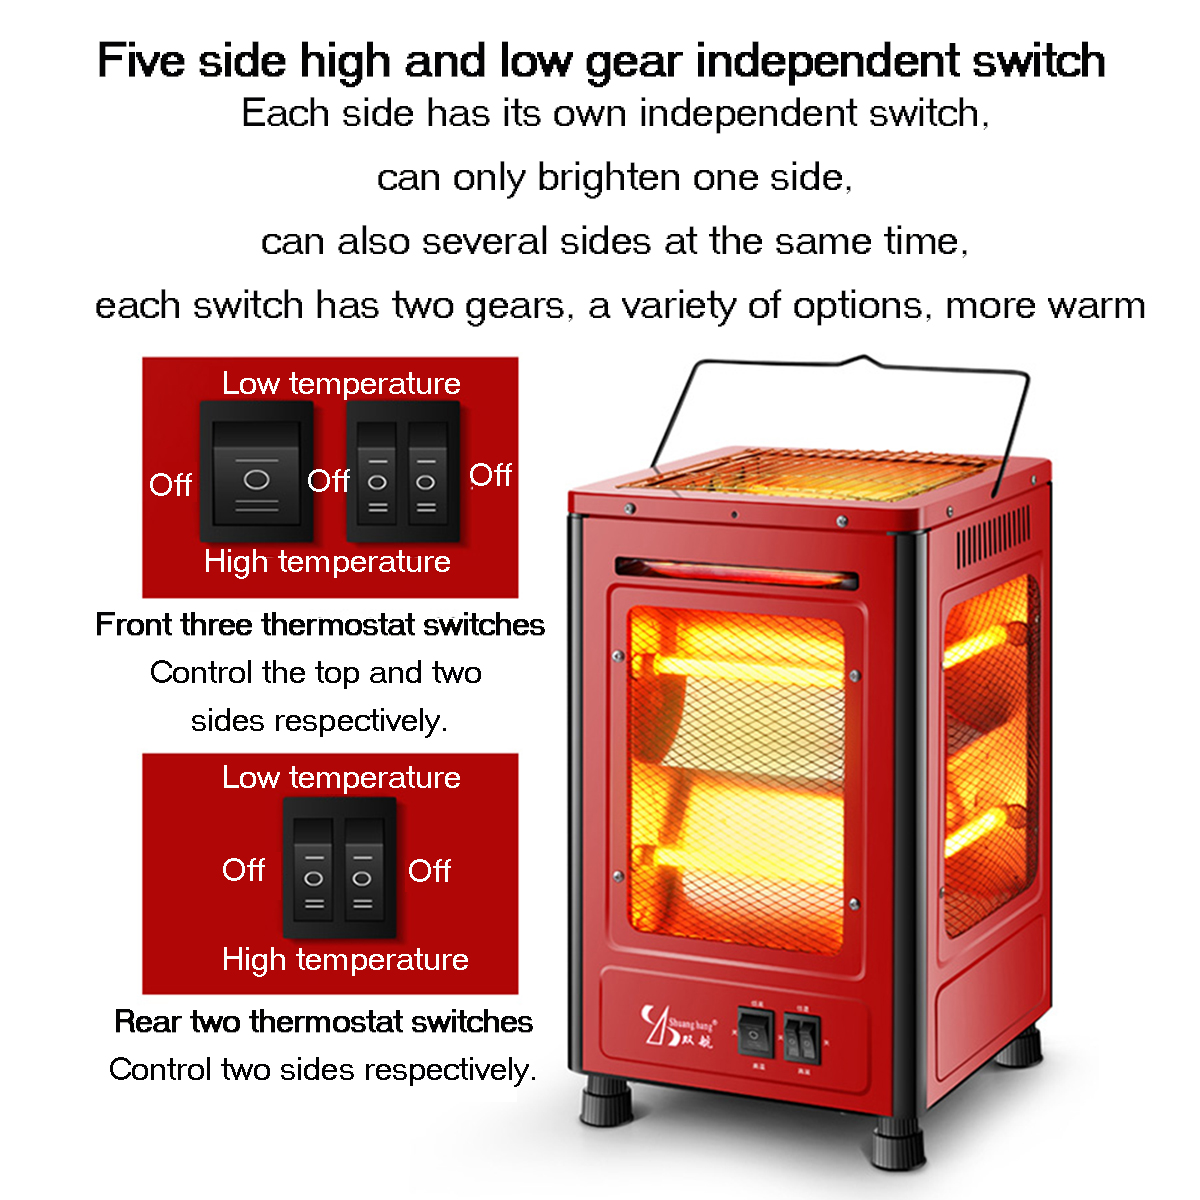 220V-2000W-Five-Sided-Heater-Grill-Type-Brazier-Heater-Energy-Saving-Vertical-Electric-Heater-1375379-3